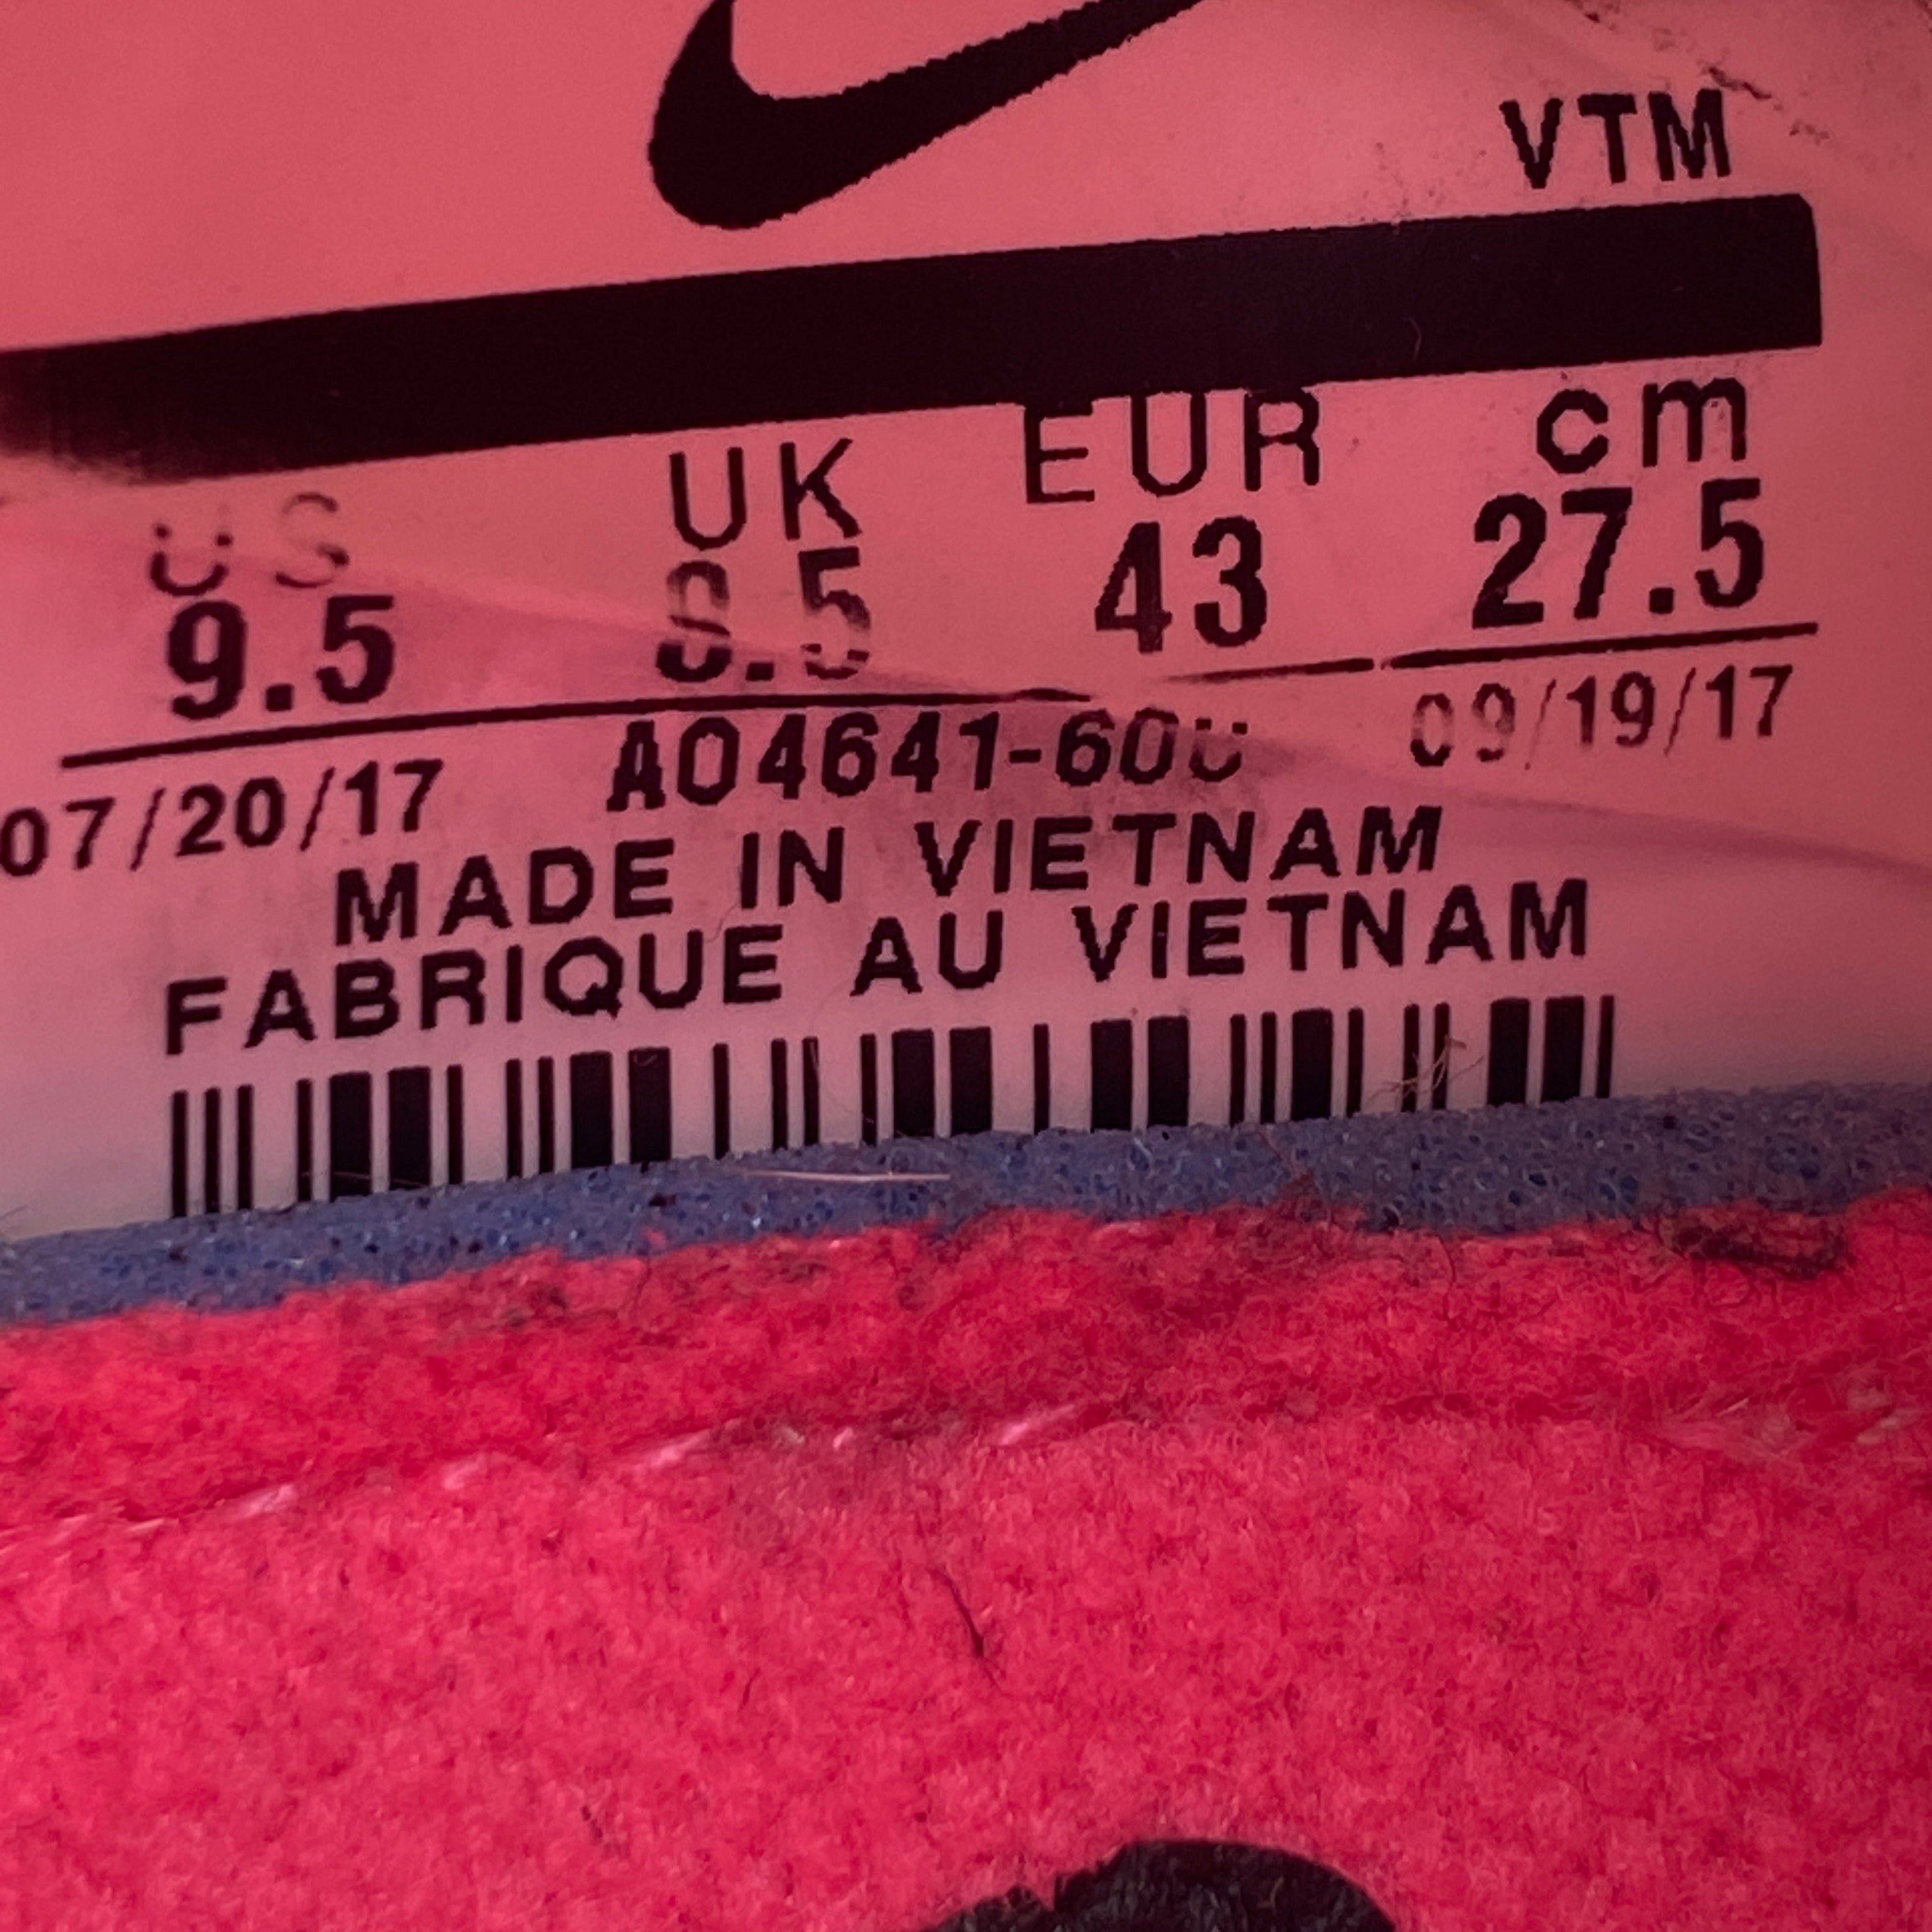 Nike Air Max 180 "Cdg White" 2018 Used Size 9.5